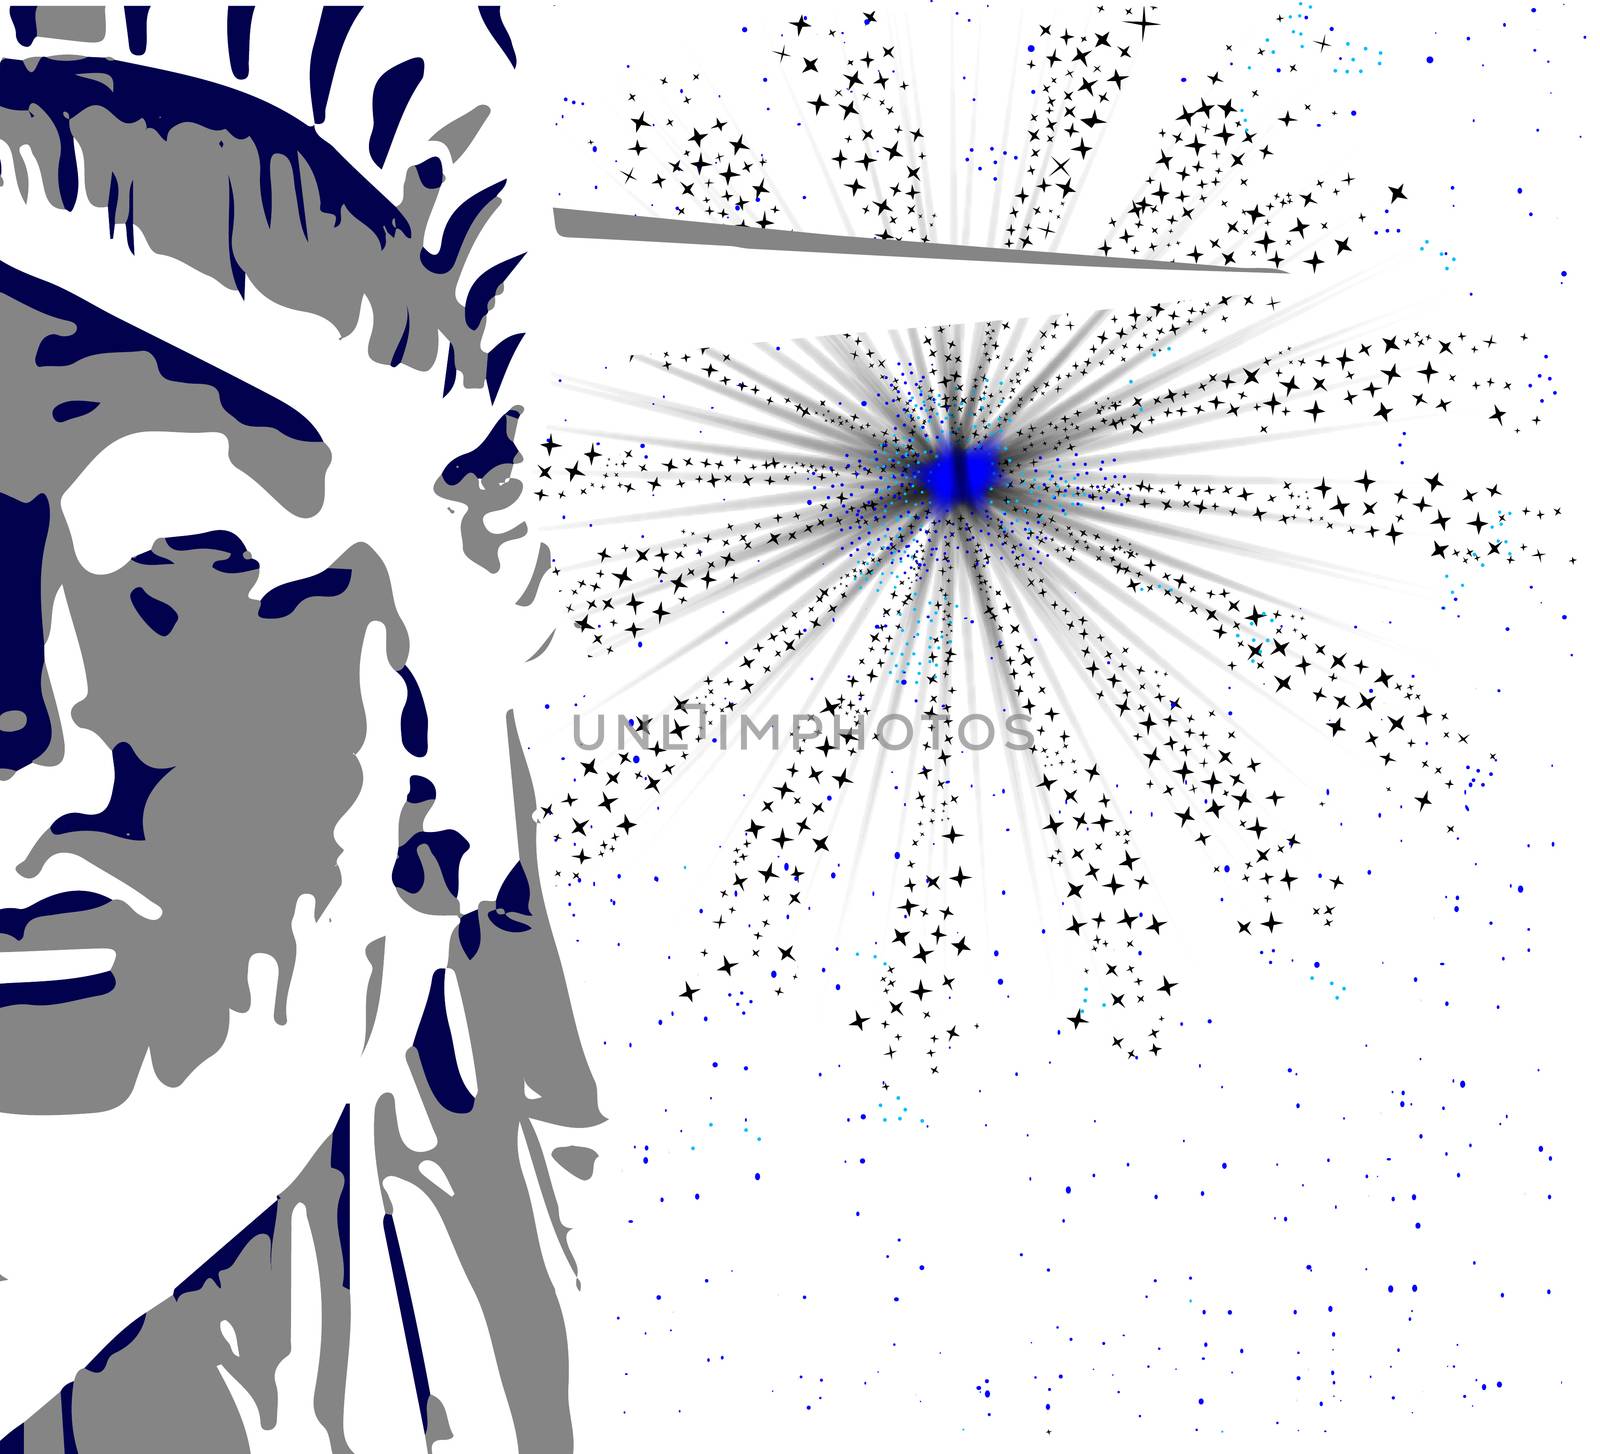 The face of the Statue of Liberty over a sky rocket 4th July background